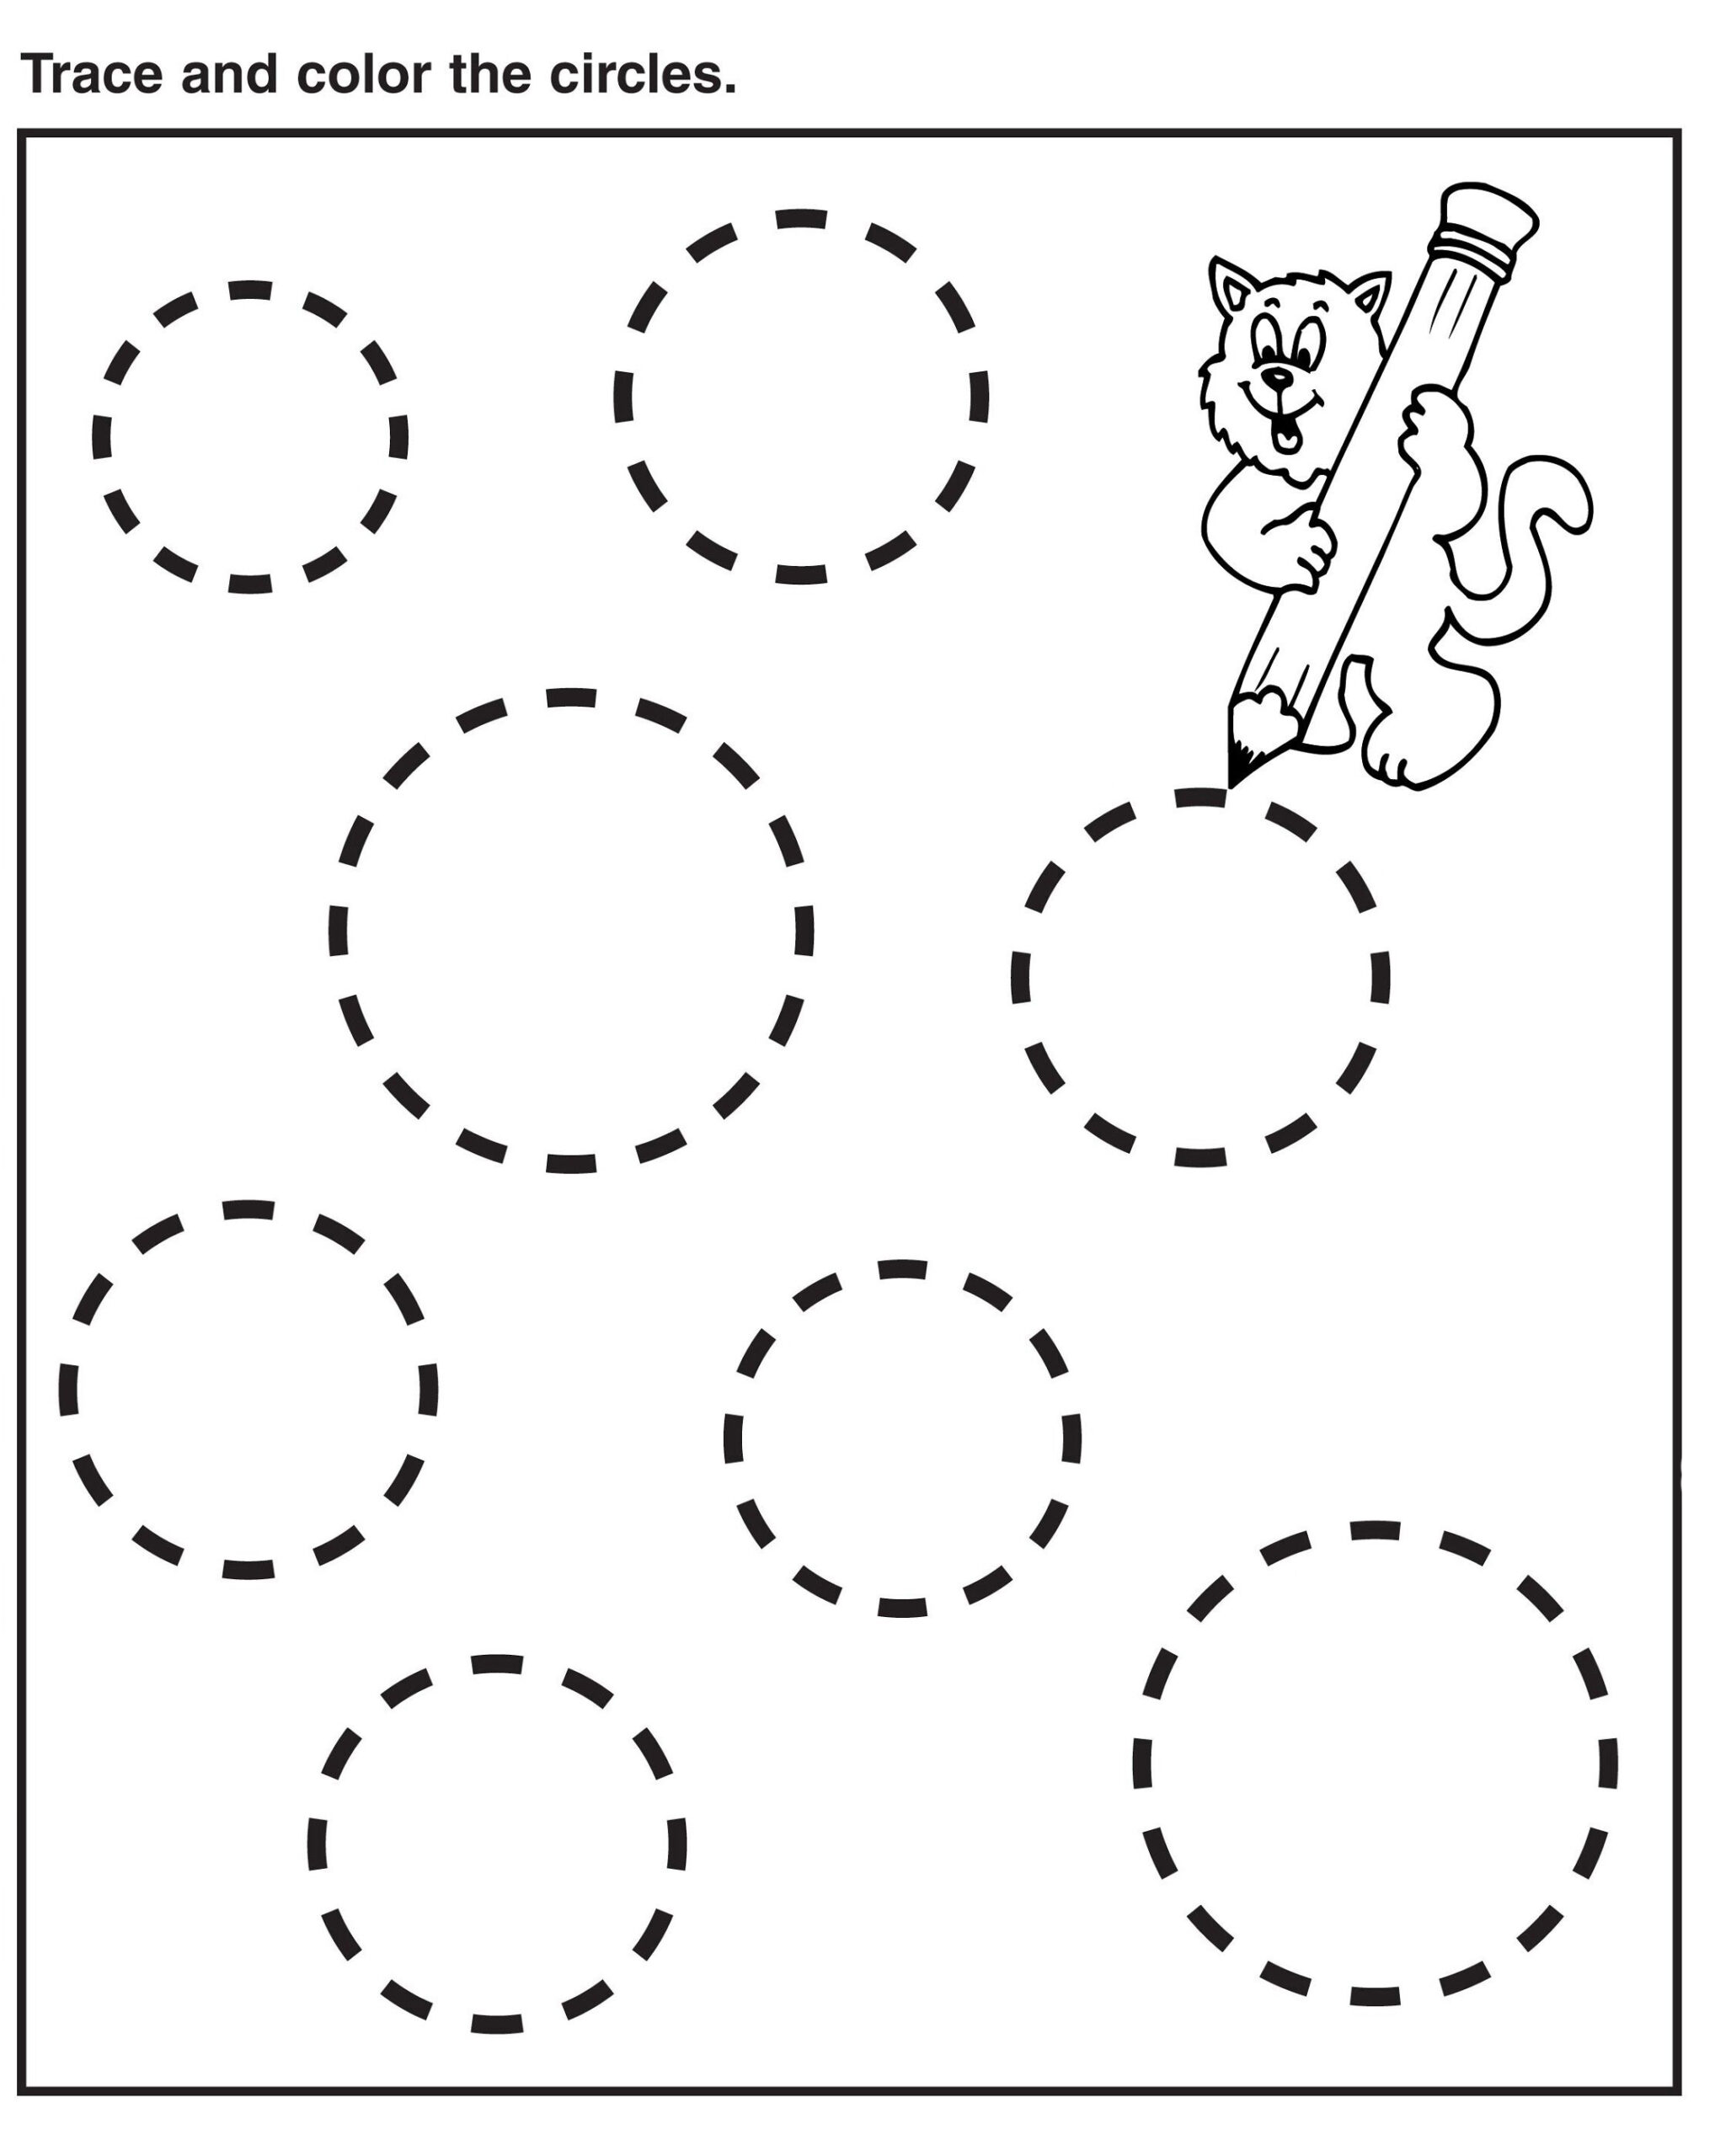 Tracing Worksheets For Toddlers | AlphabetWorksheetsFree.com